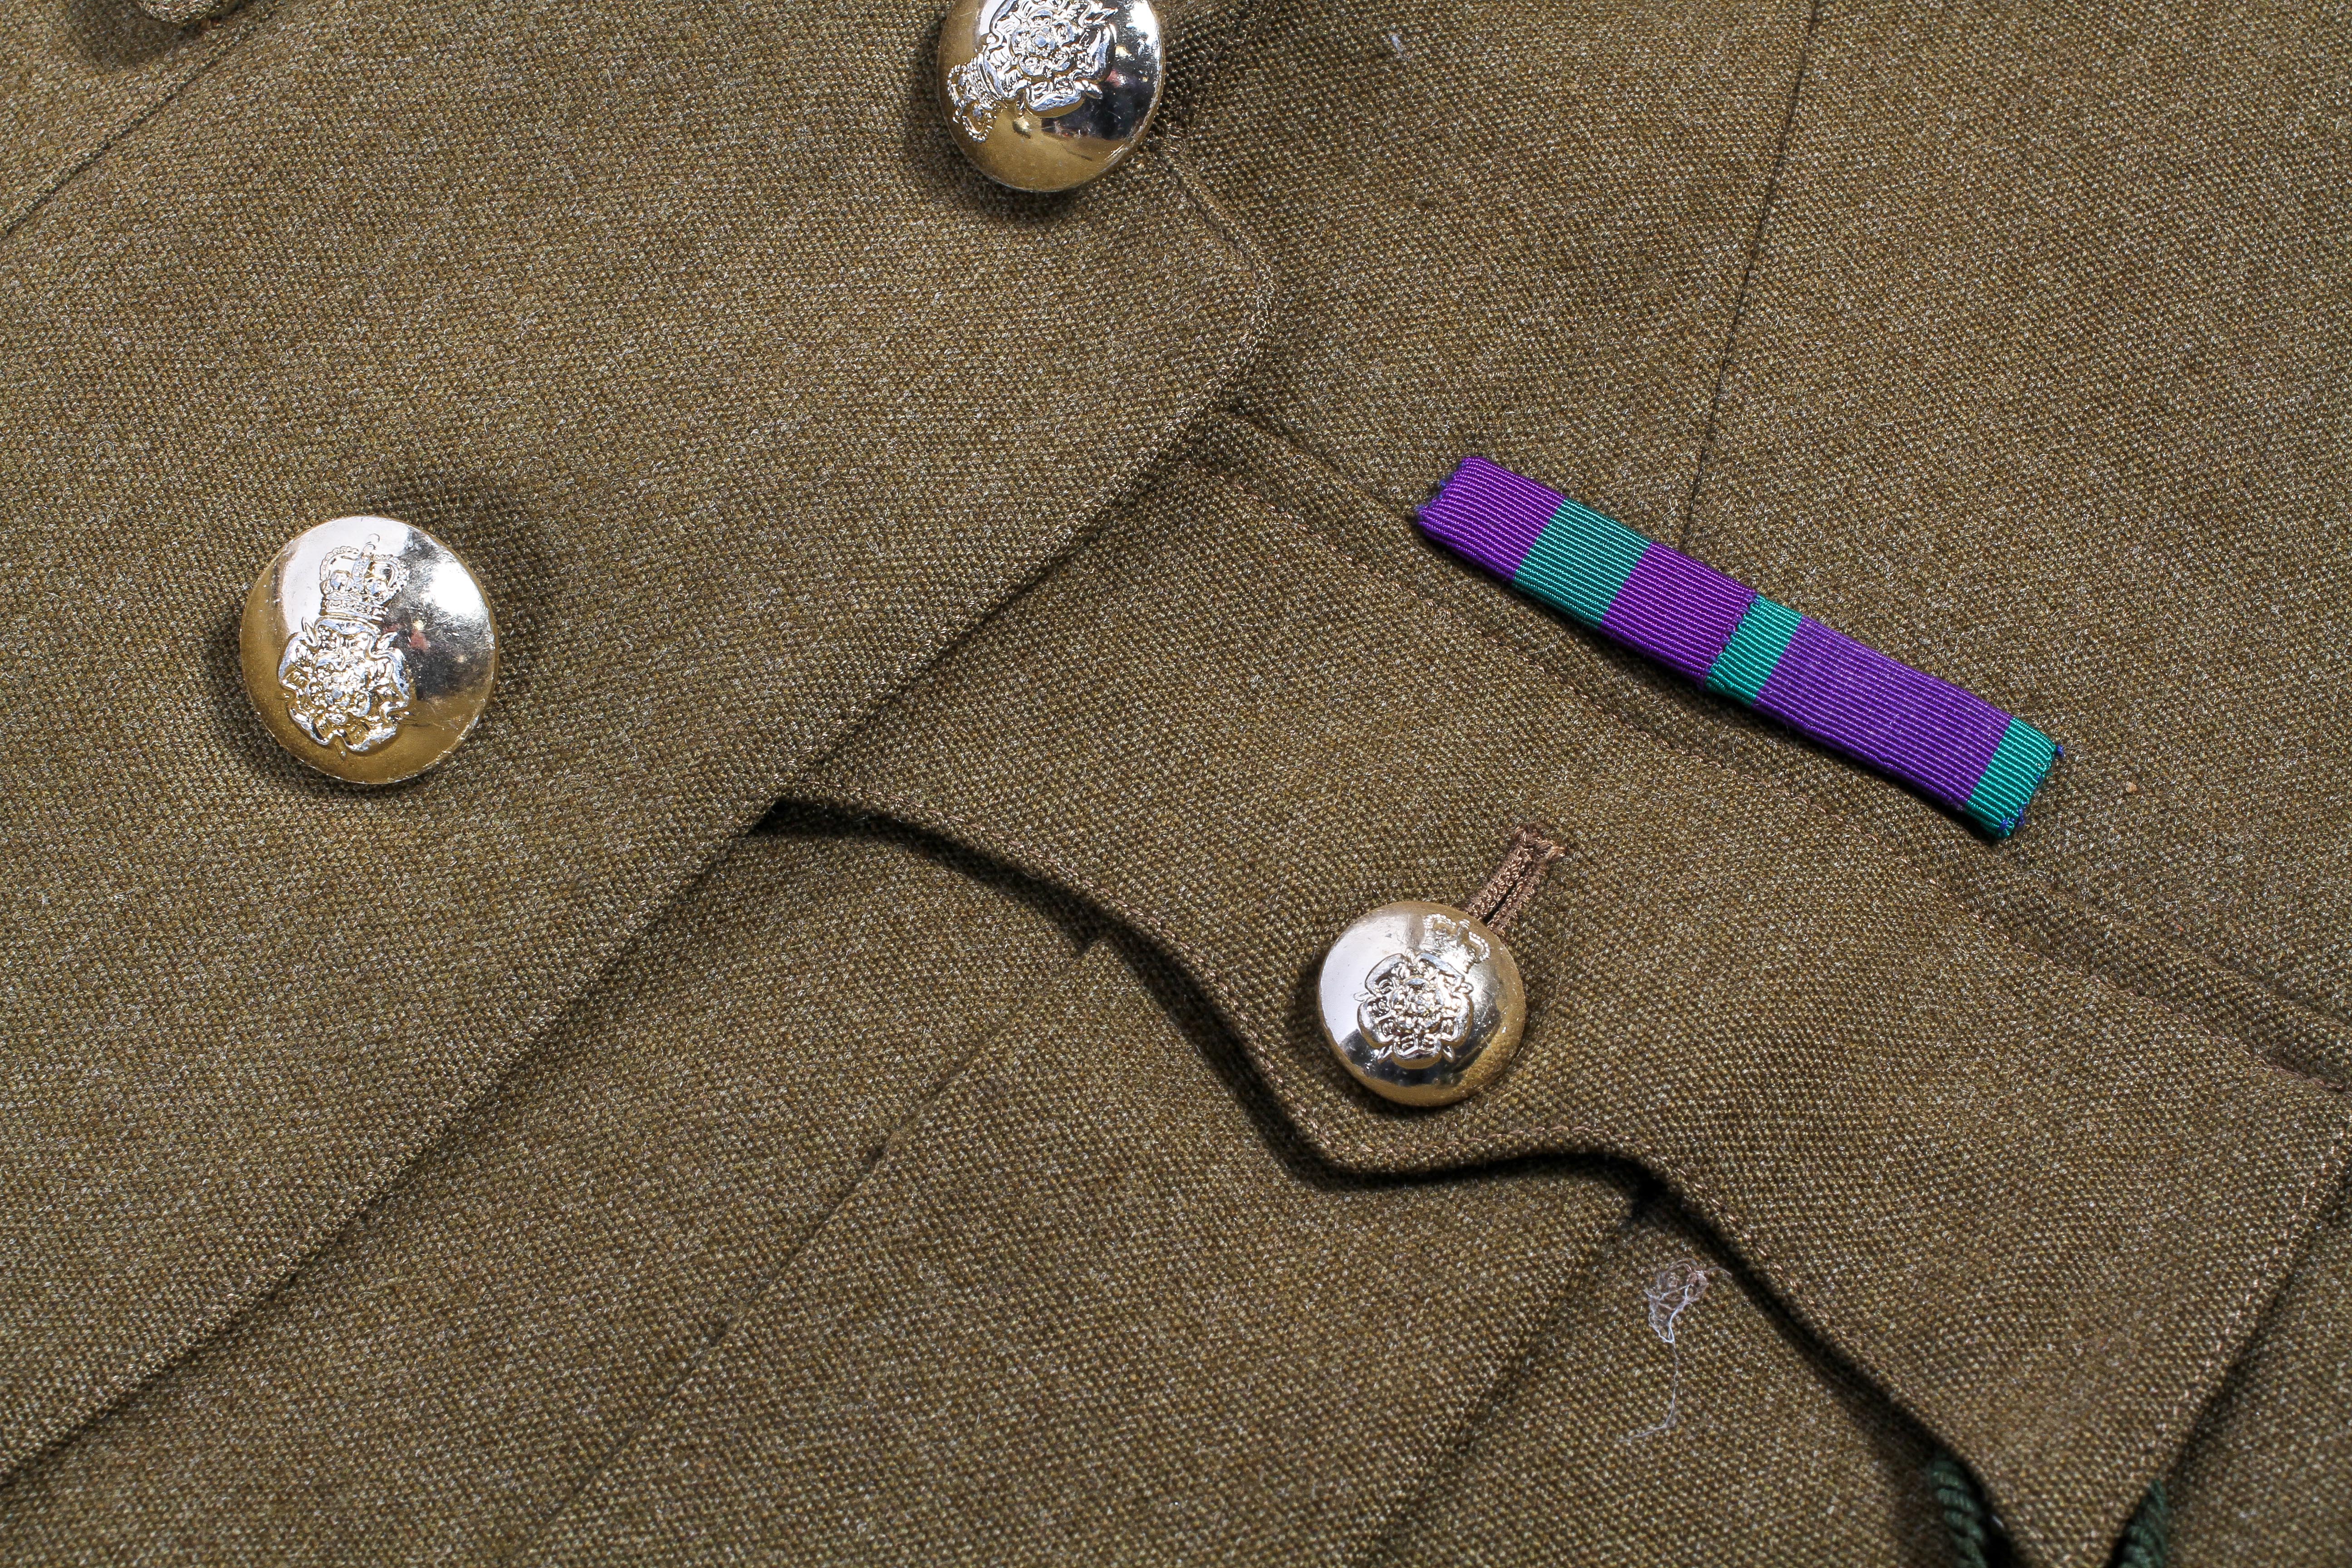 A 20th century British military army coat, - Image 3 of 4